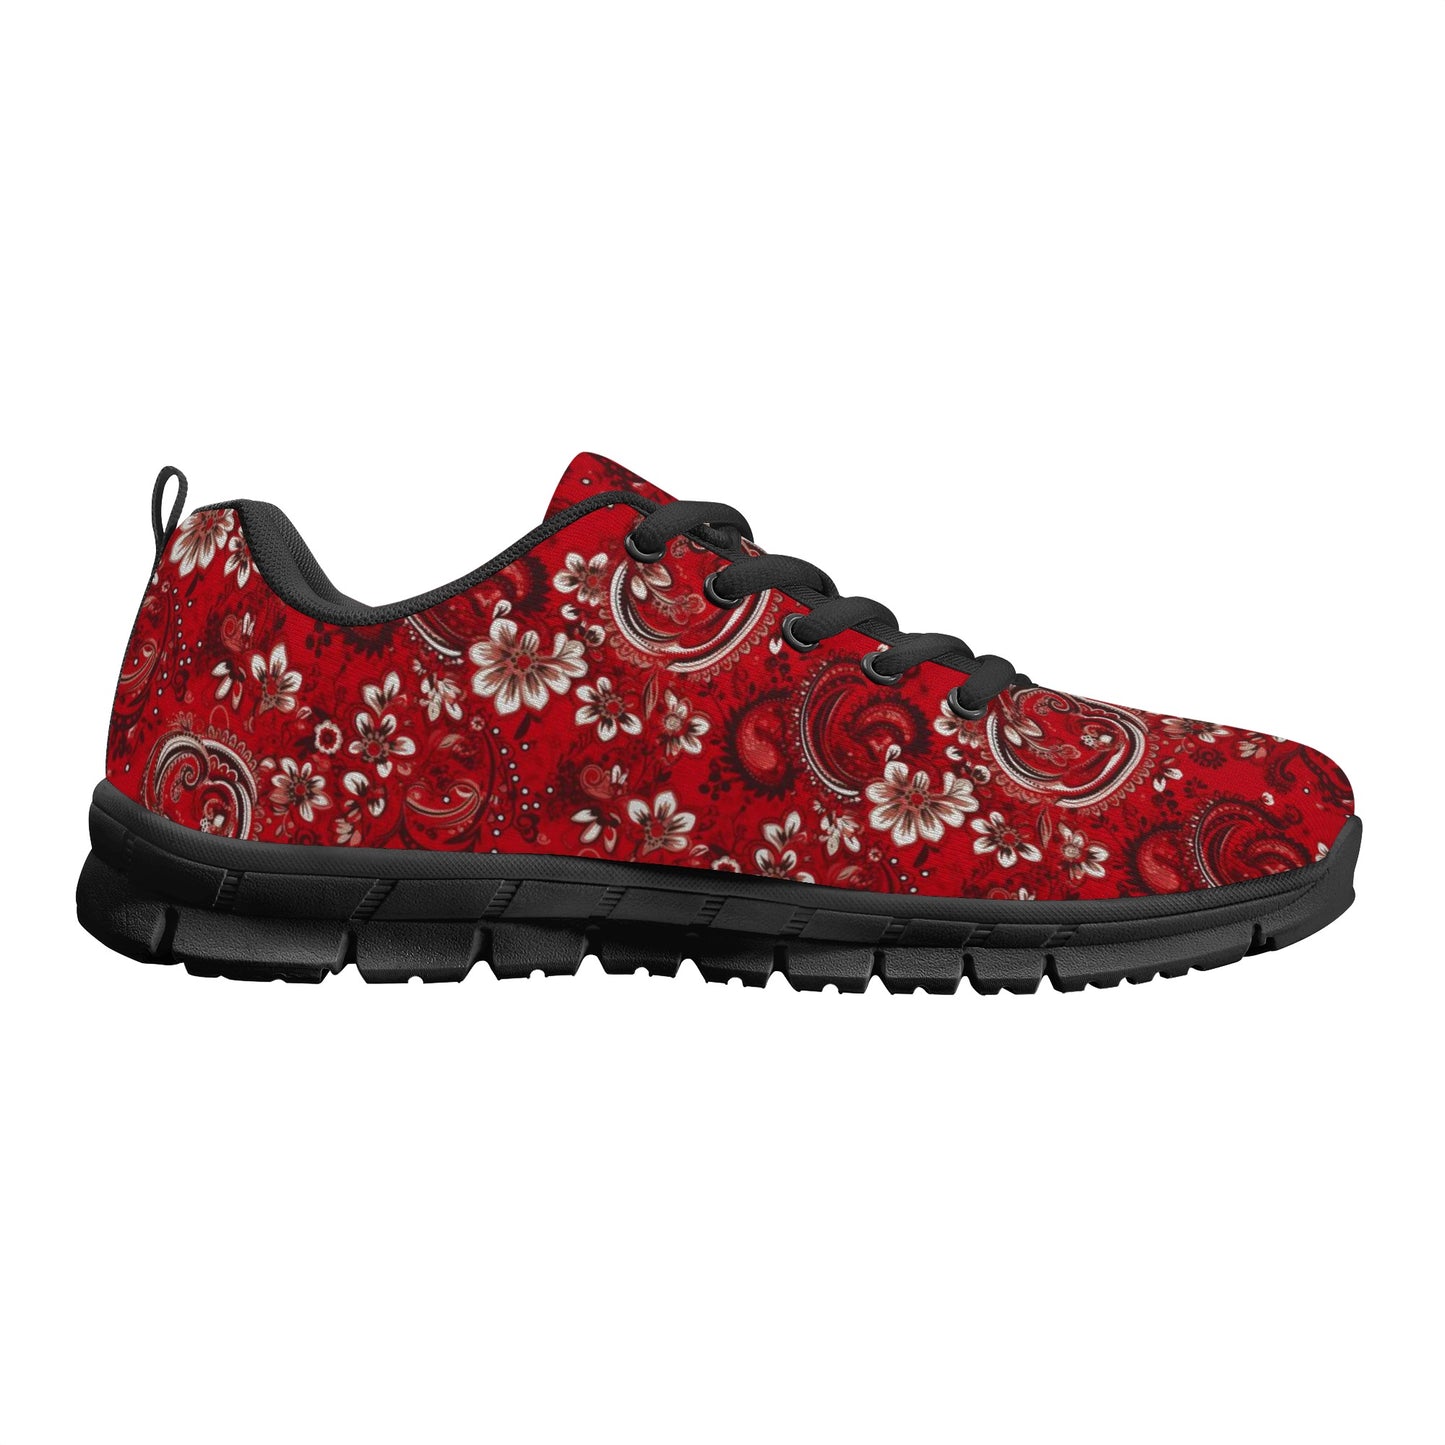 Red Bandana Women Athletic Sneaker, Paisley Lace Up Shoe Canvas Print Designer Running Black White Mesh Breathable Ladies Shoes